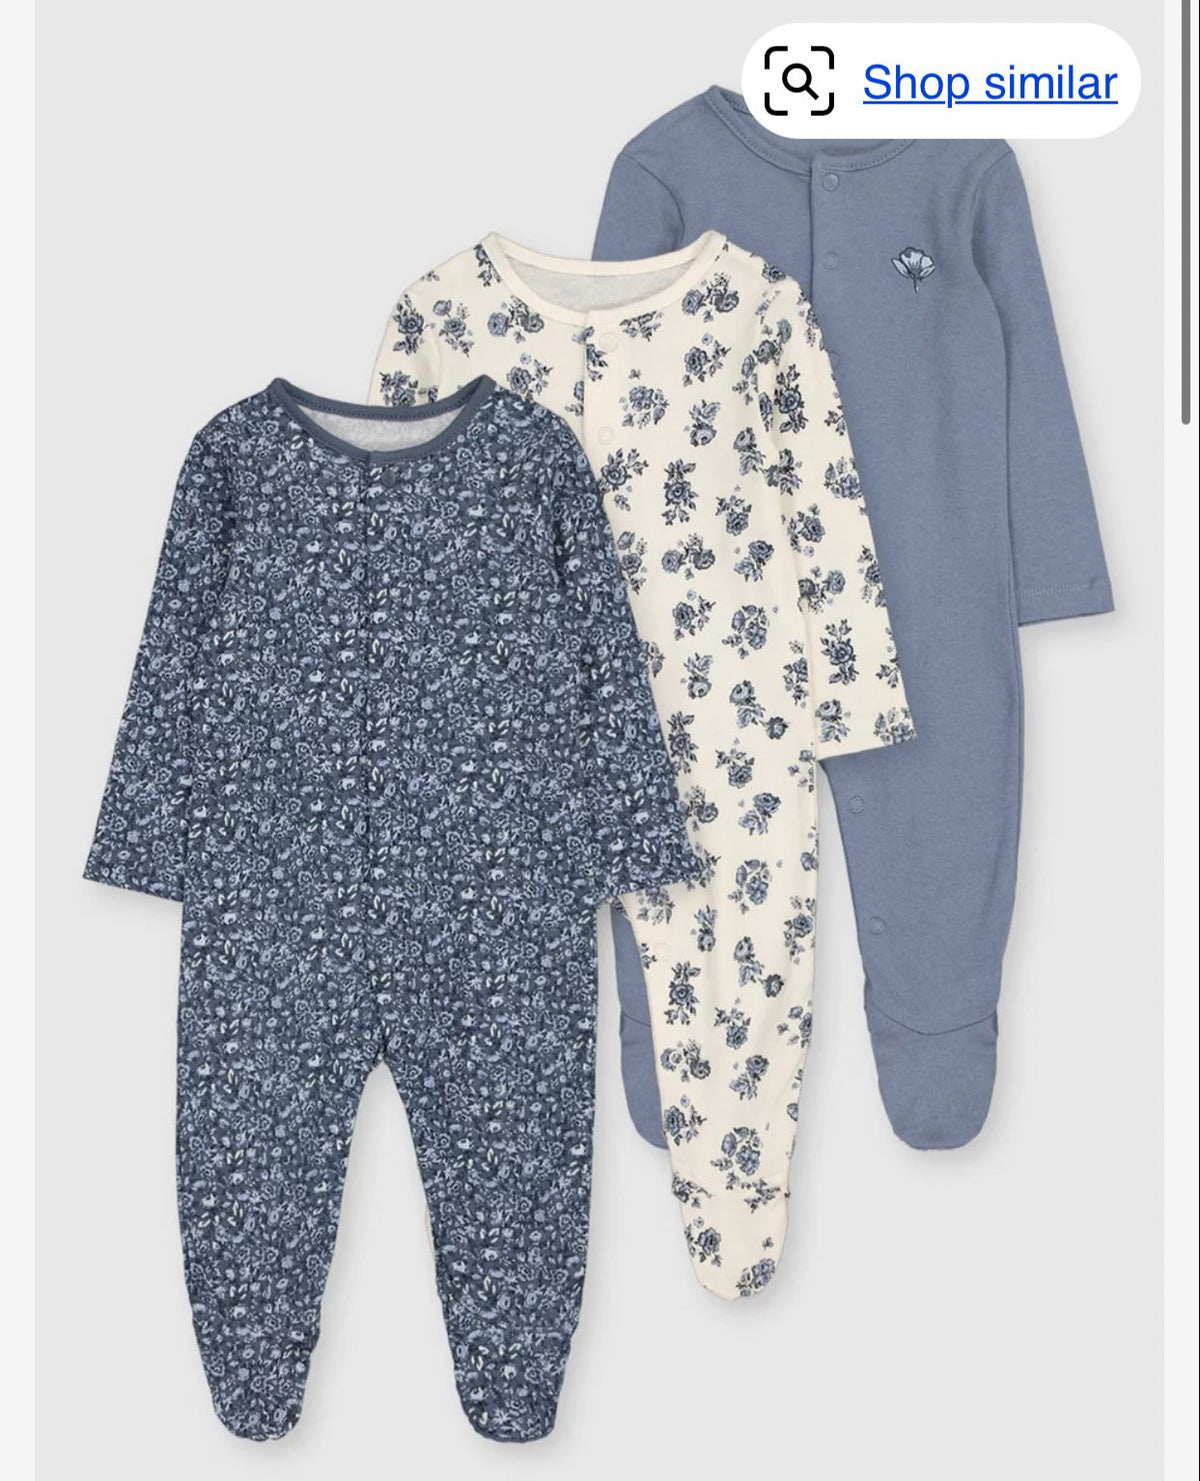 Creamy and blue sleep suits pack of 3